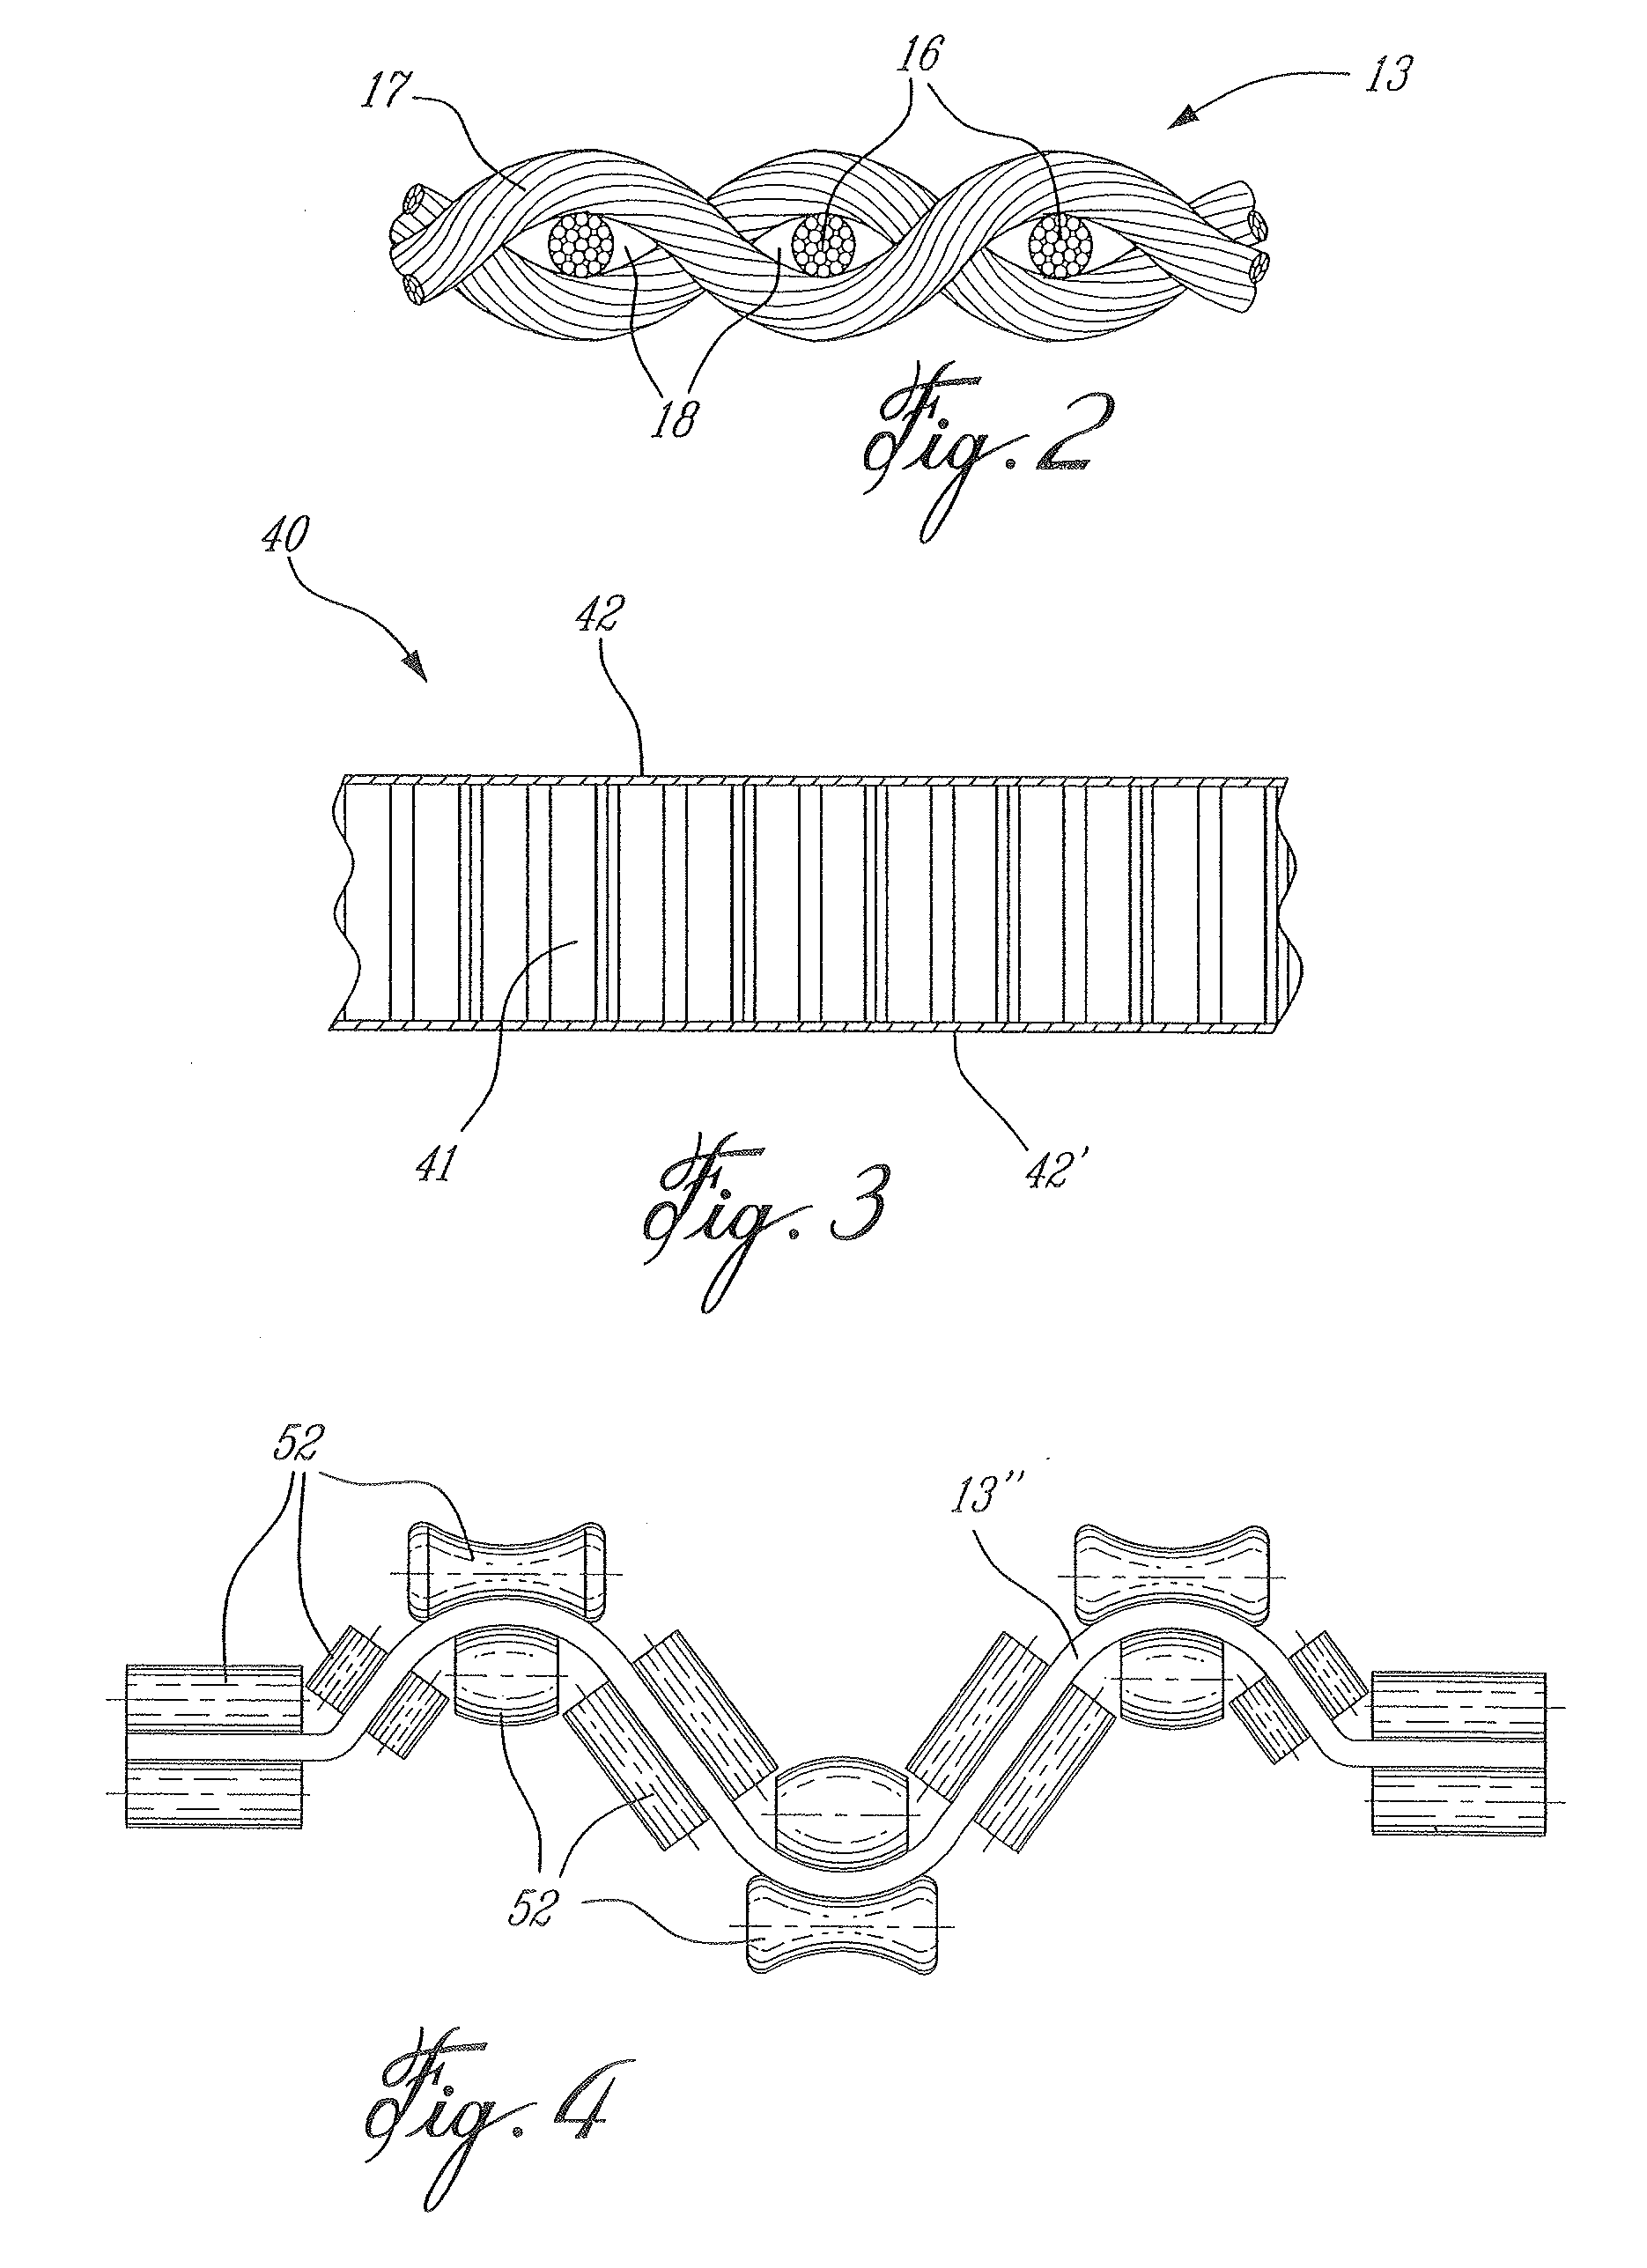 Process for producing lightweight thermoplastic composite products in a continuous manner